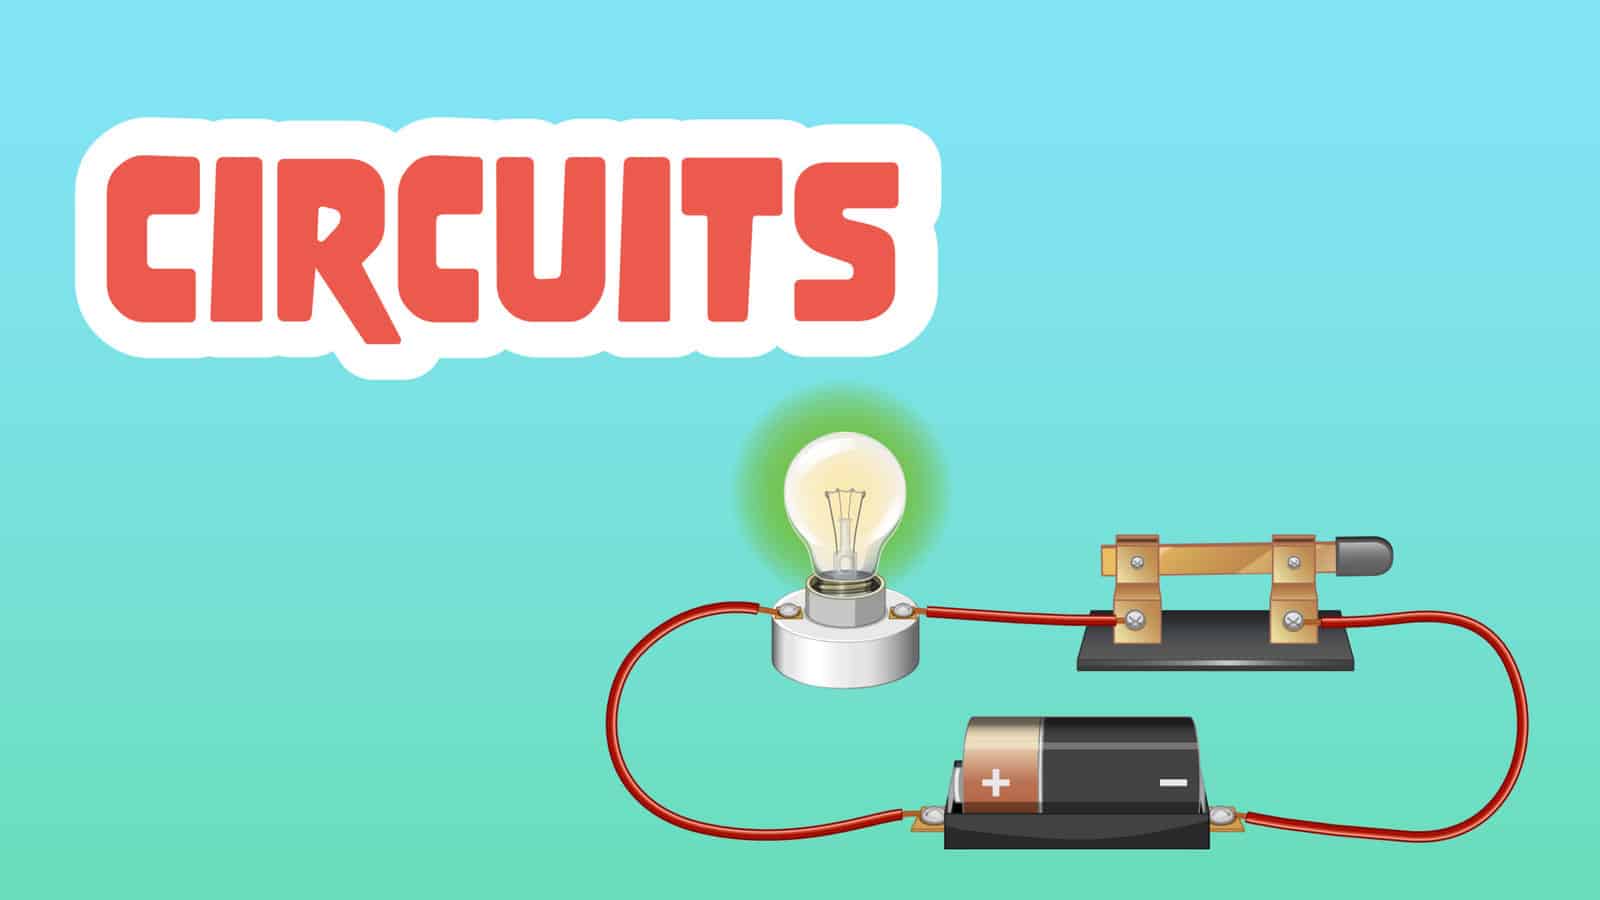 Circuits Facts for Kids – 5 Energetic Facts about Circuits